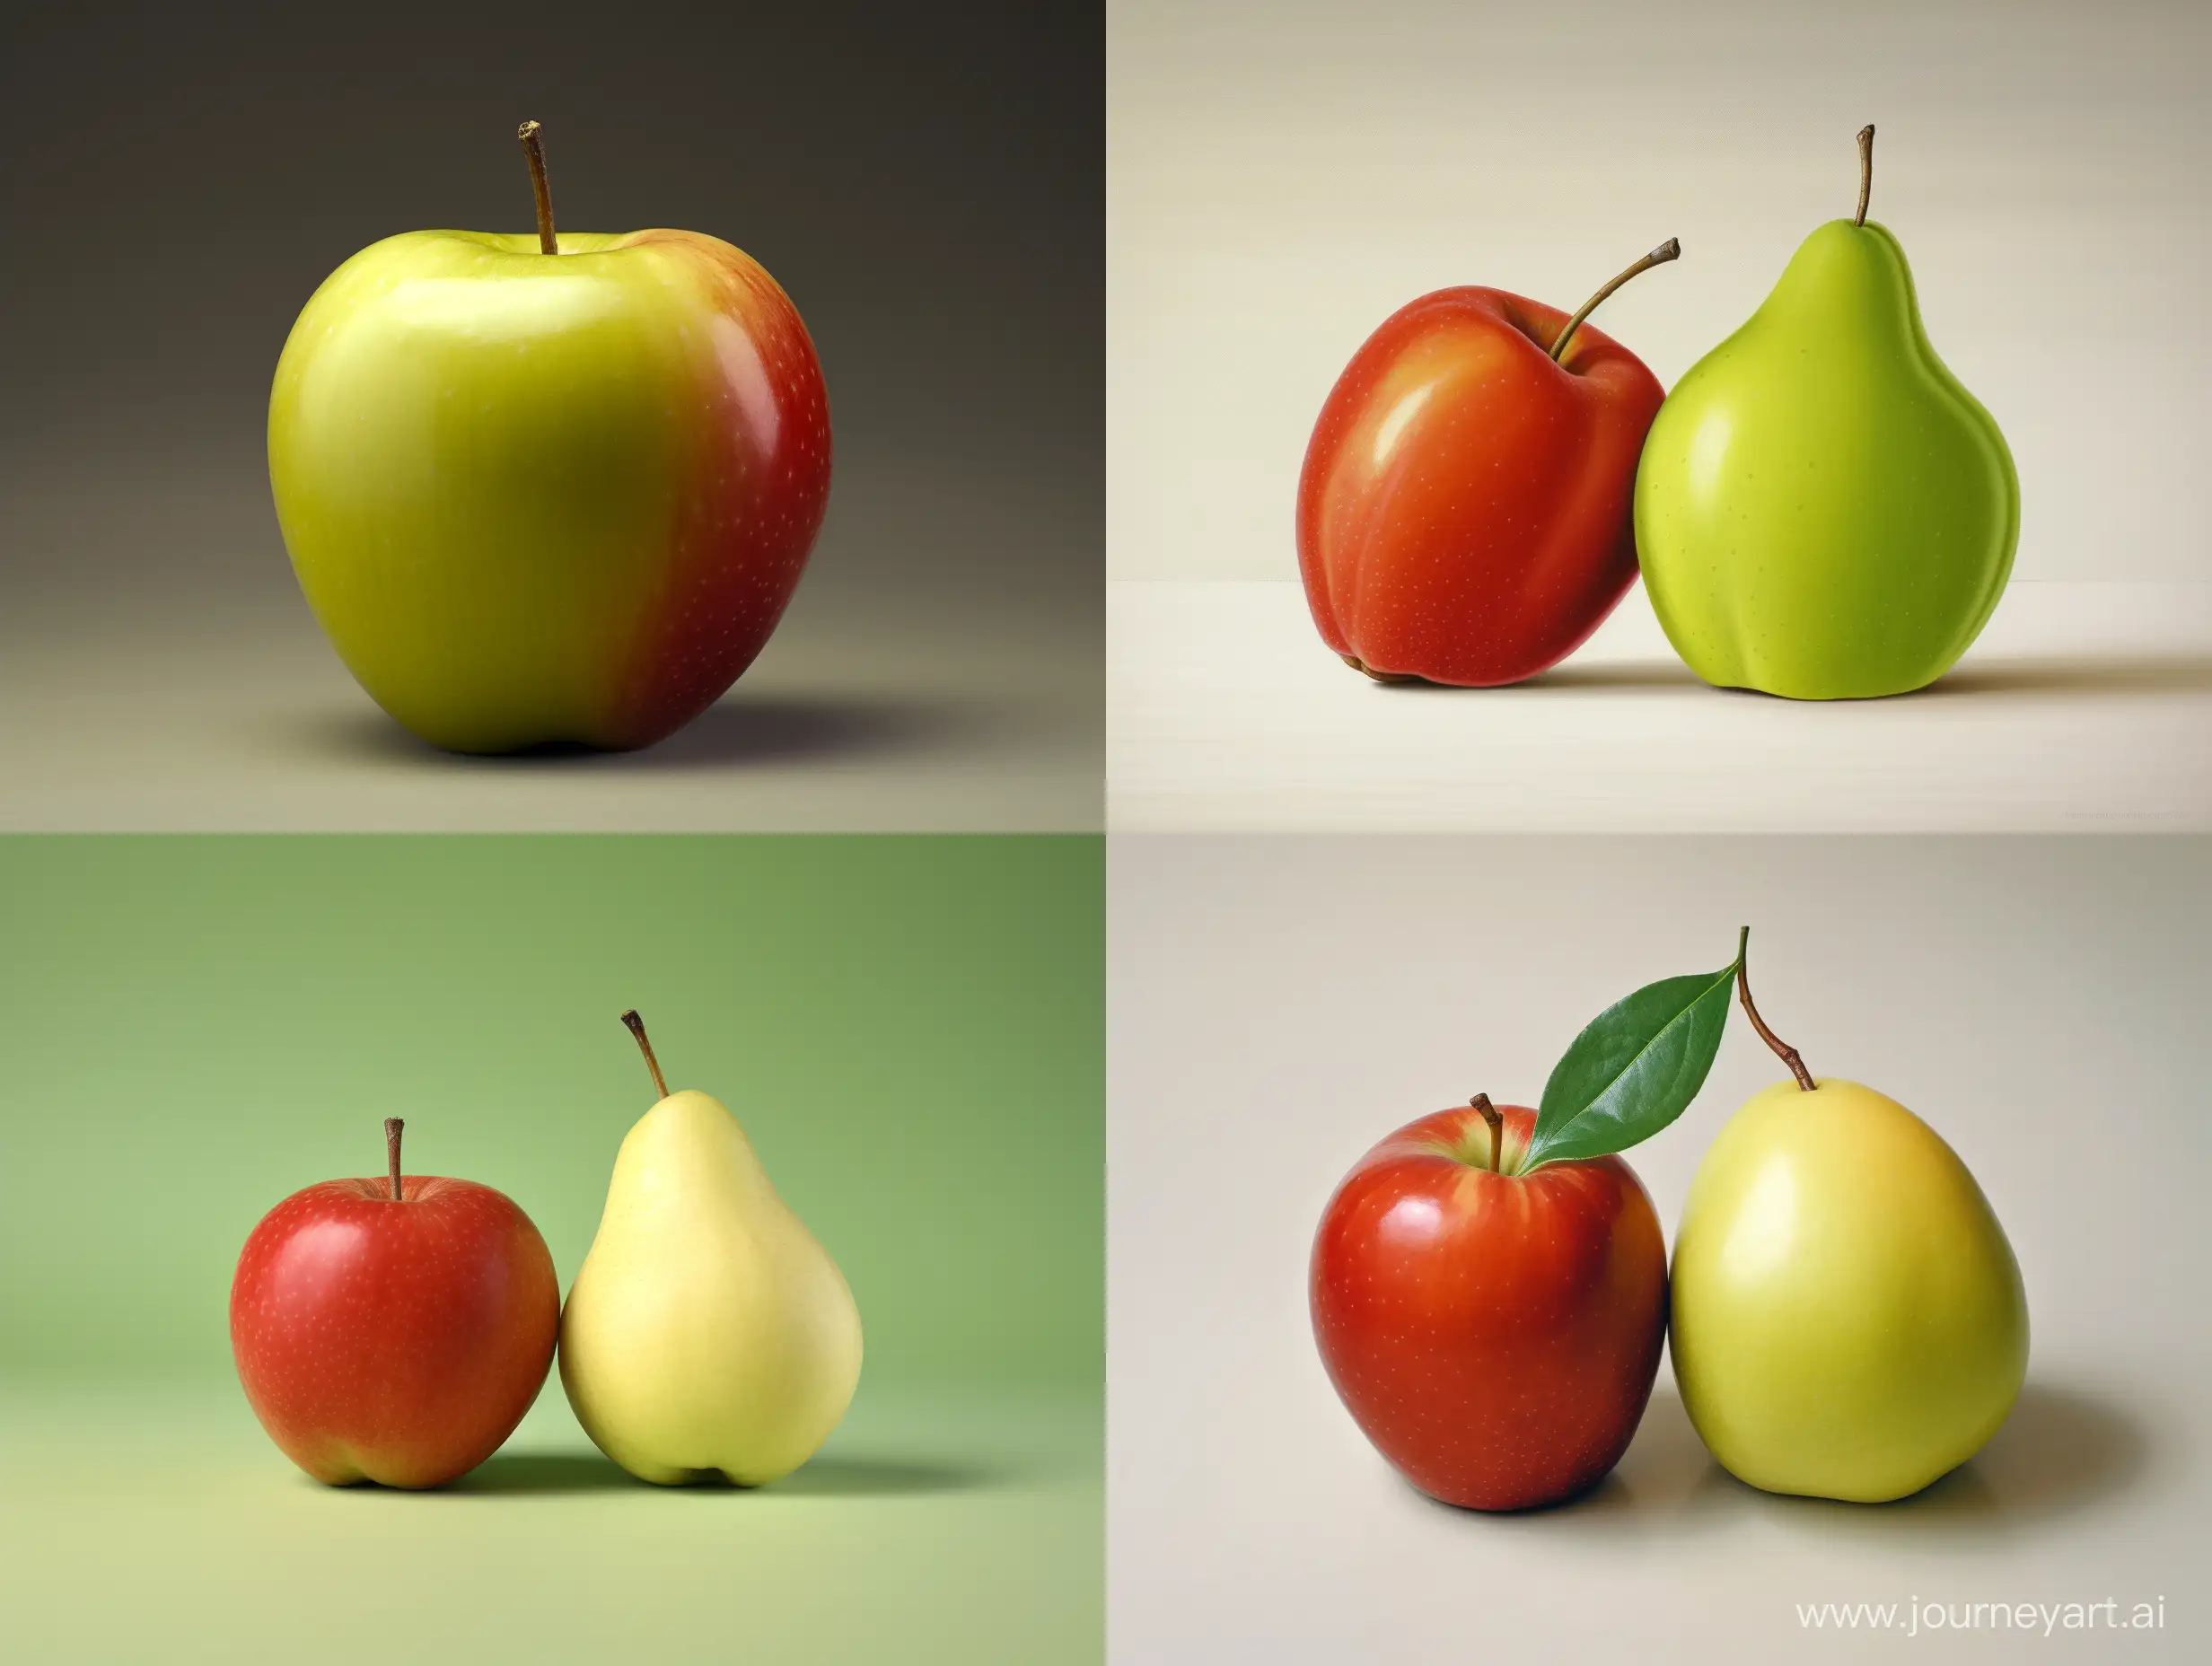 Unique-Hybrid-Fruit-ApplePear-Fusion-in-Artistic-Display